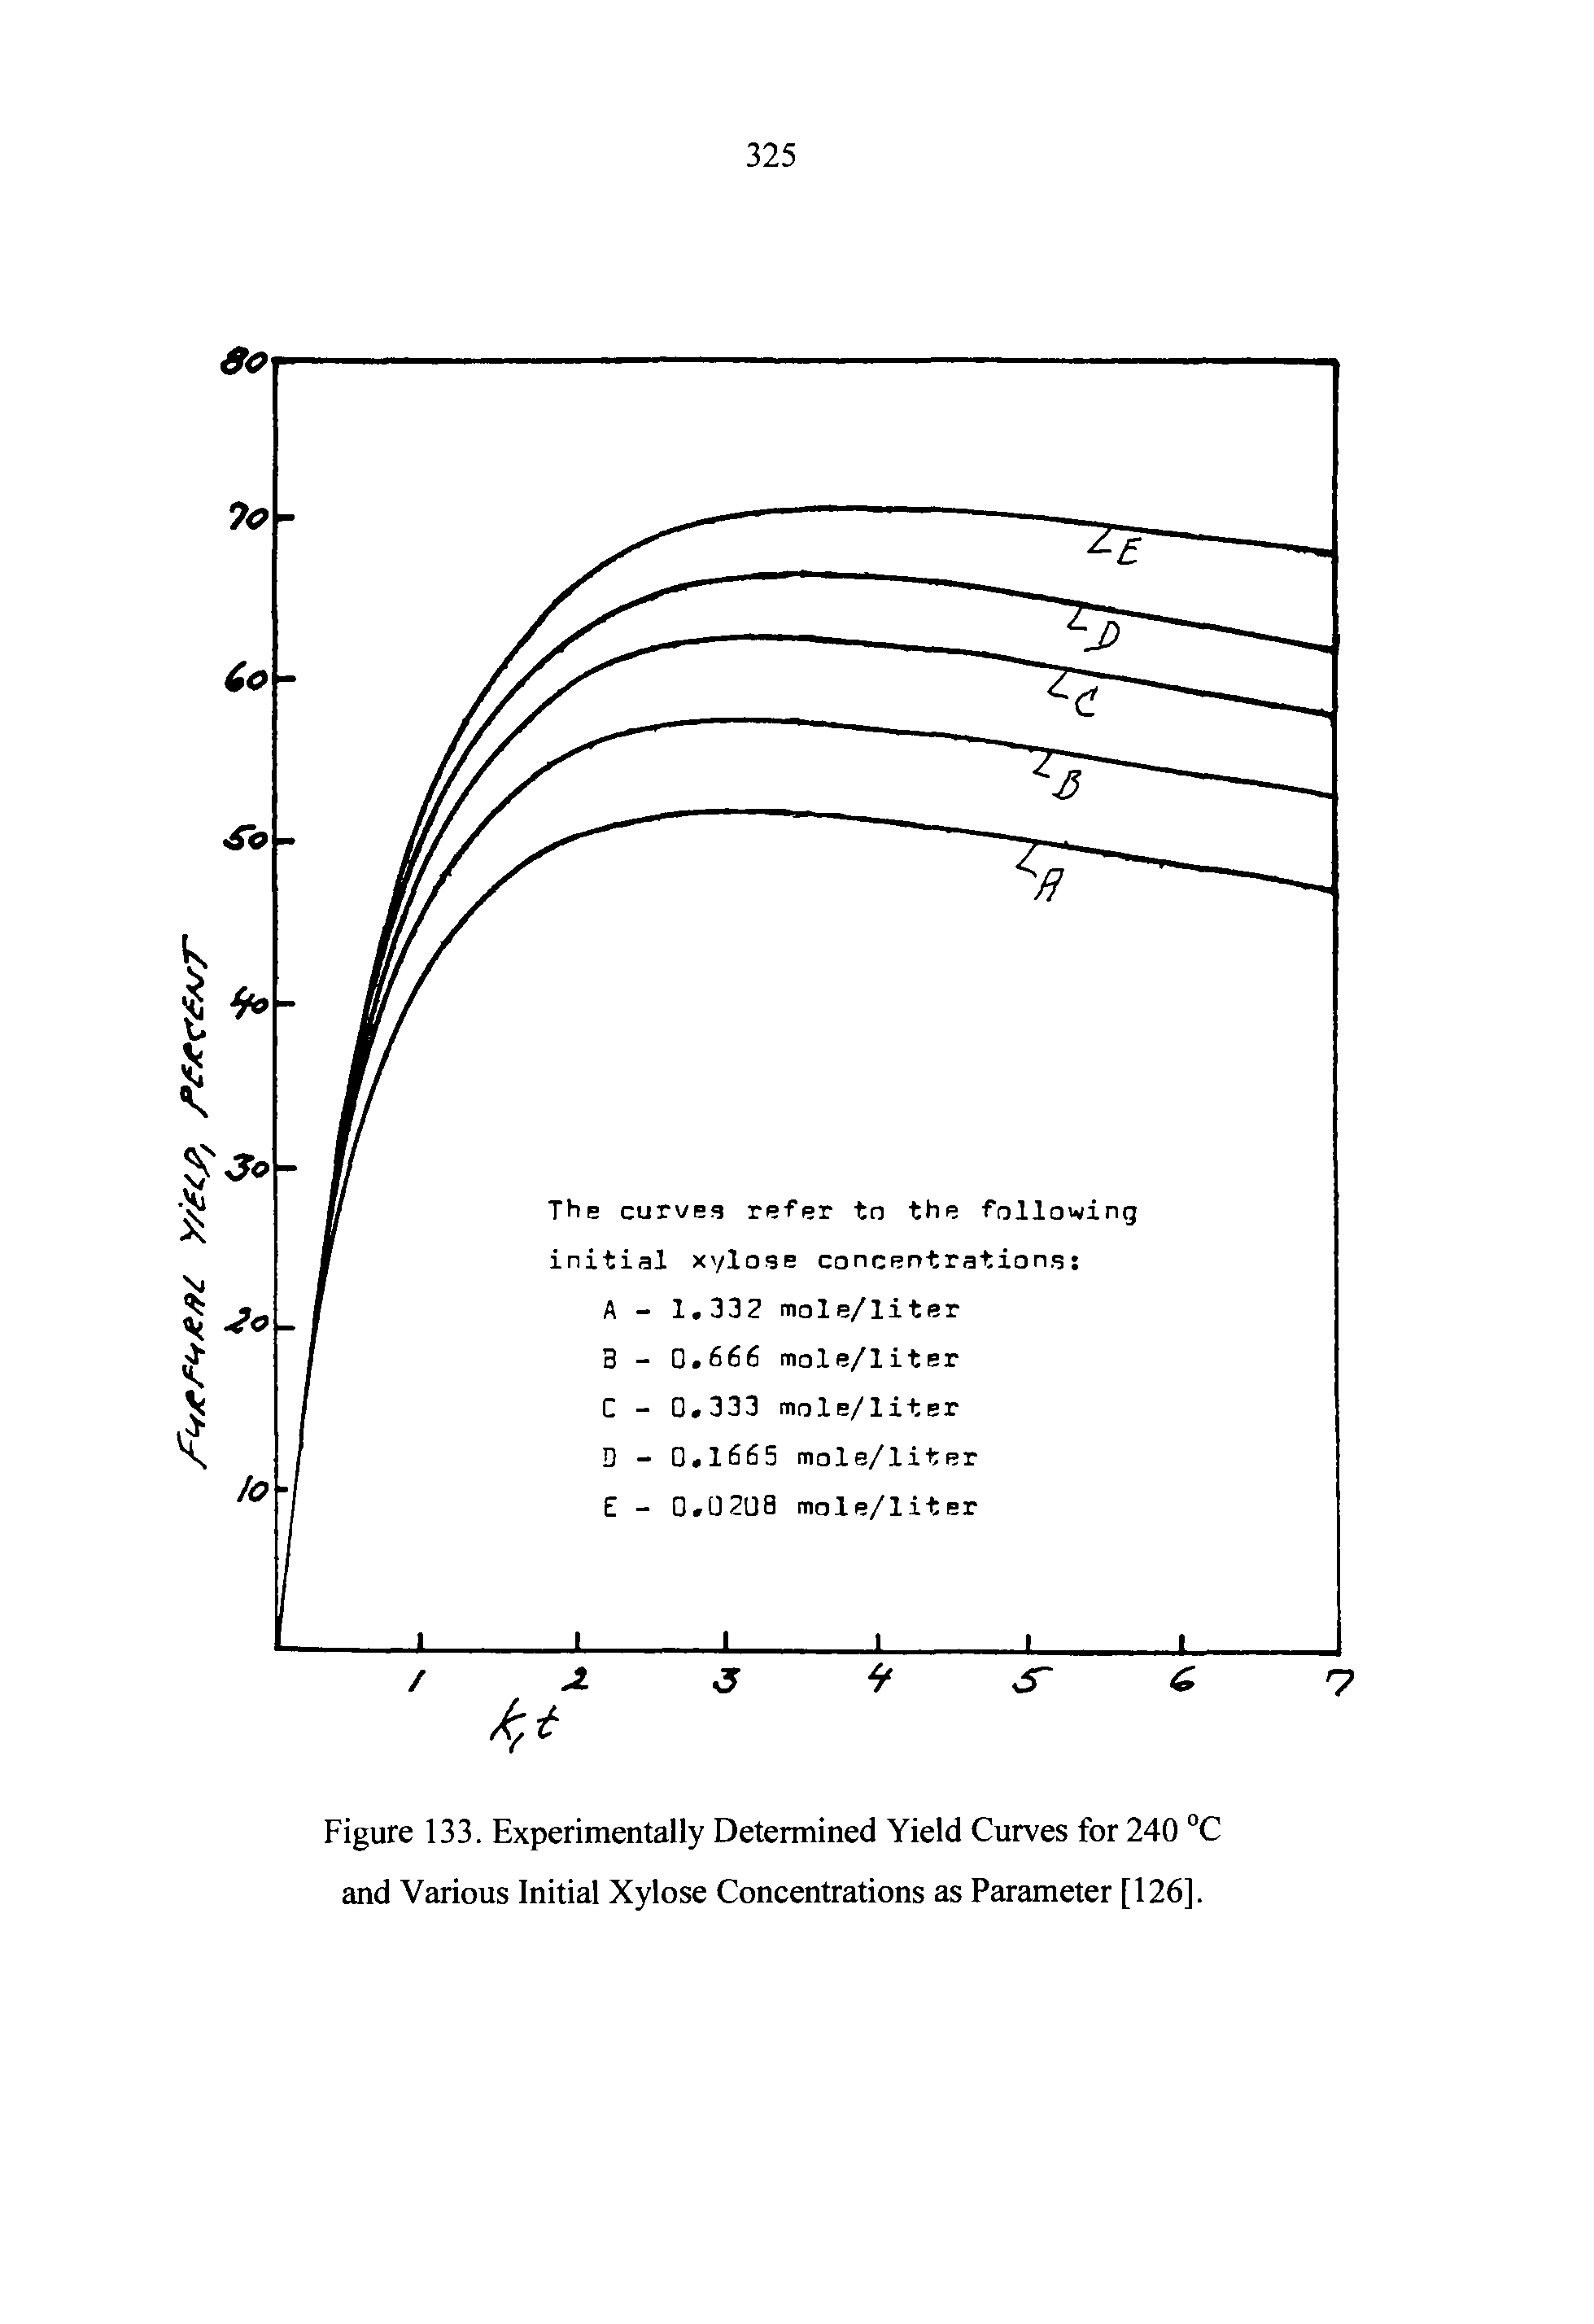 Figure 133. Experimentally Determined Yield Curves for 240 C and Various Initial Xylose Concentrations as Parameter [126].